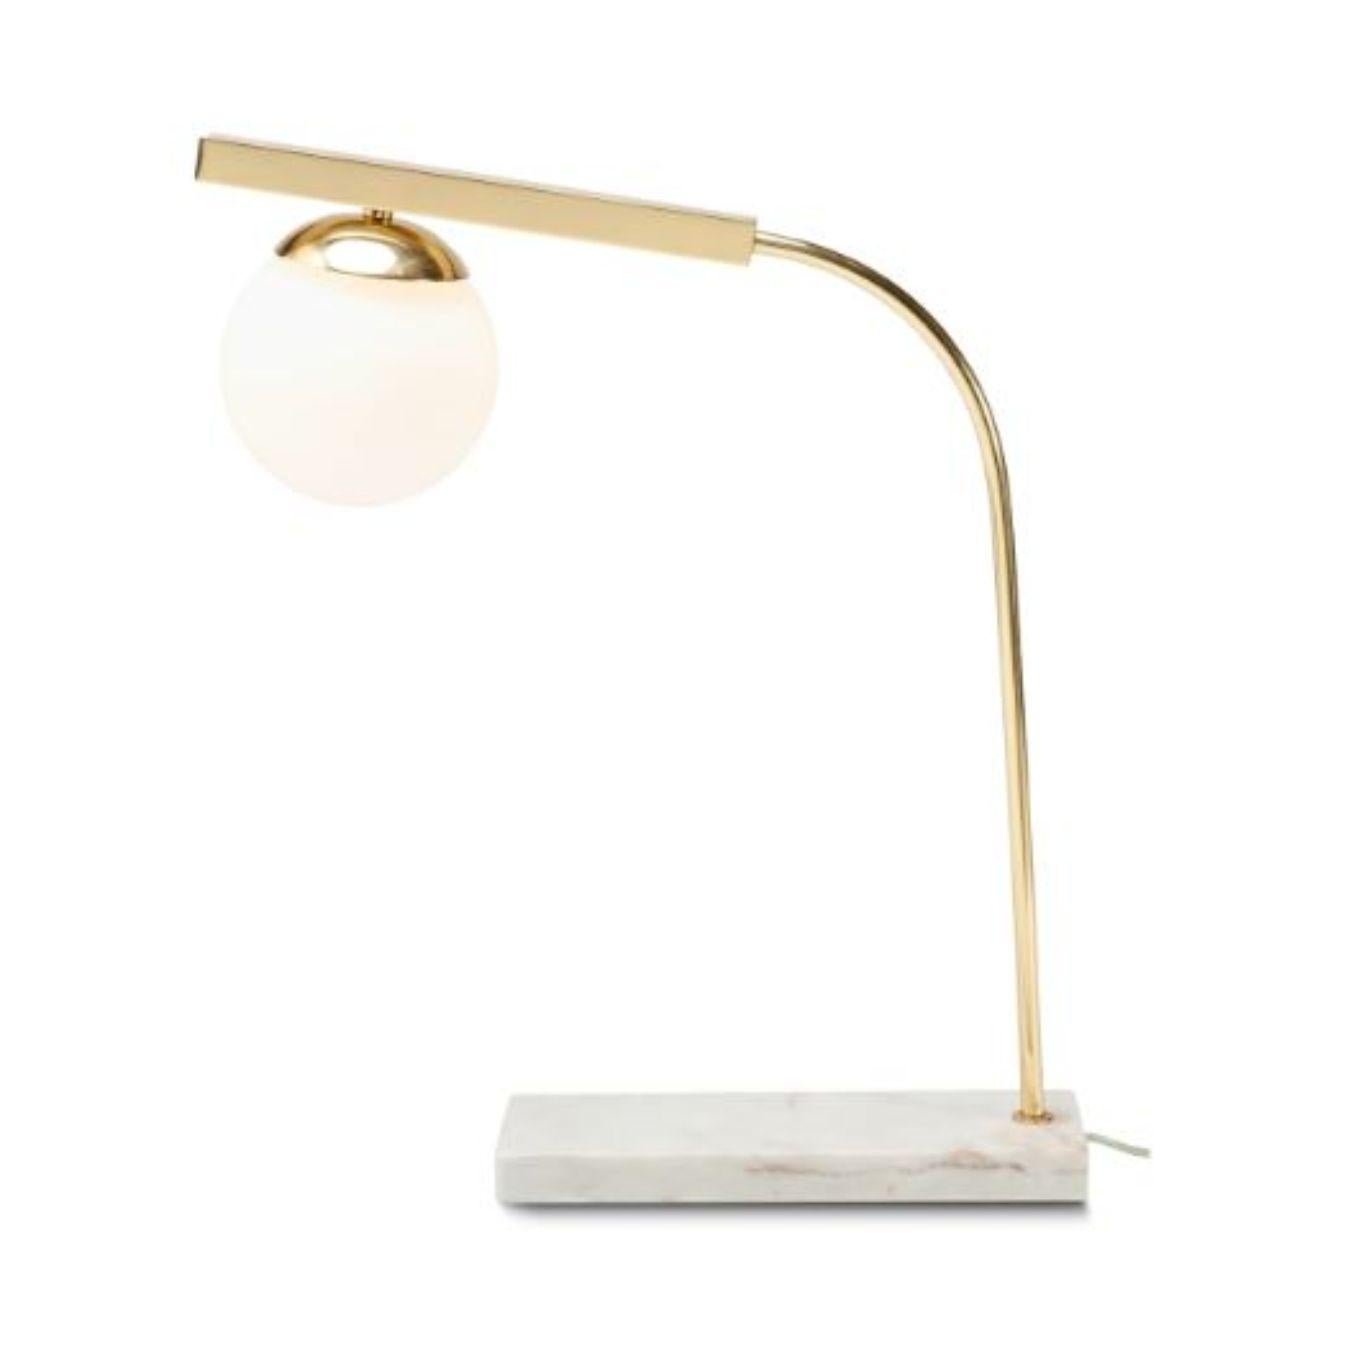 Brass Globe table lamp by Dooq
Dimensions: W 42 x D 20 x H 59 cm
Materials: lacquered metal, polished or brushed metal, brass, marble.
Also available in different colors and materials. 

Information:
230V/50Hz
1 x max. G9
4W